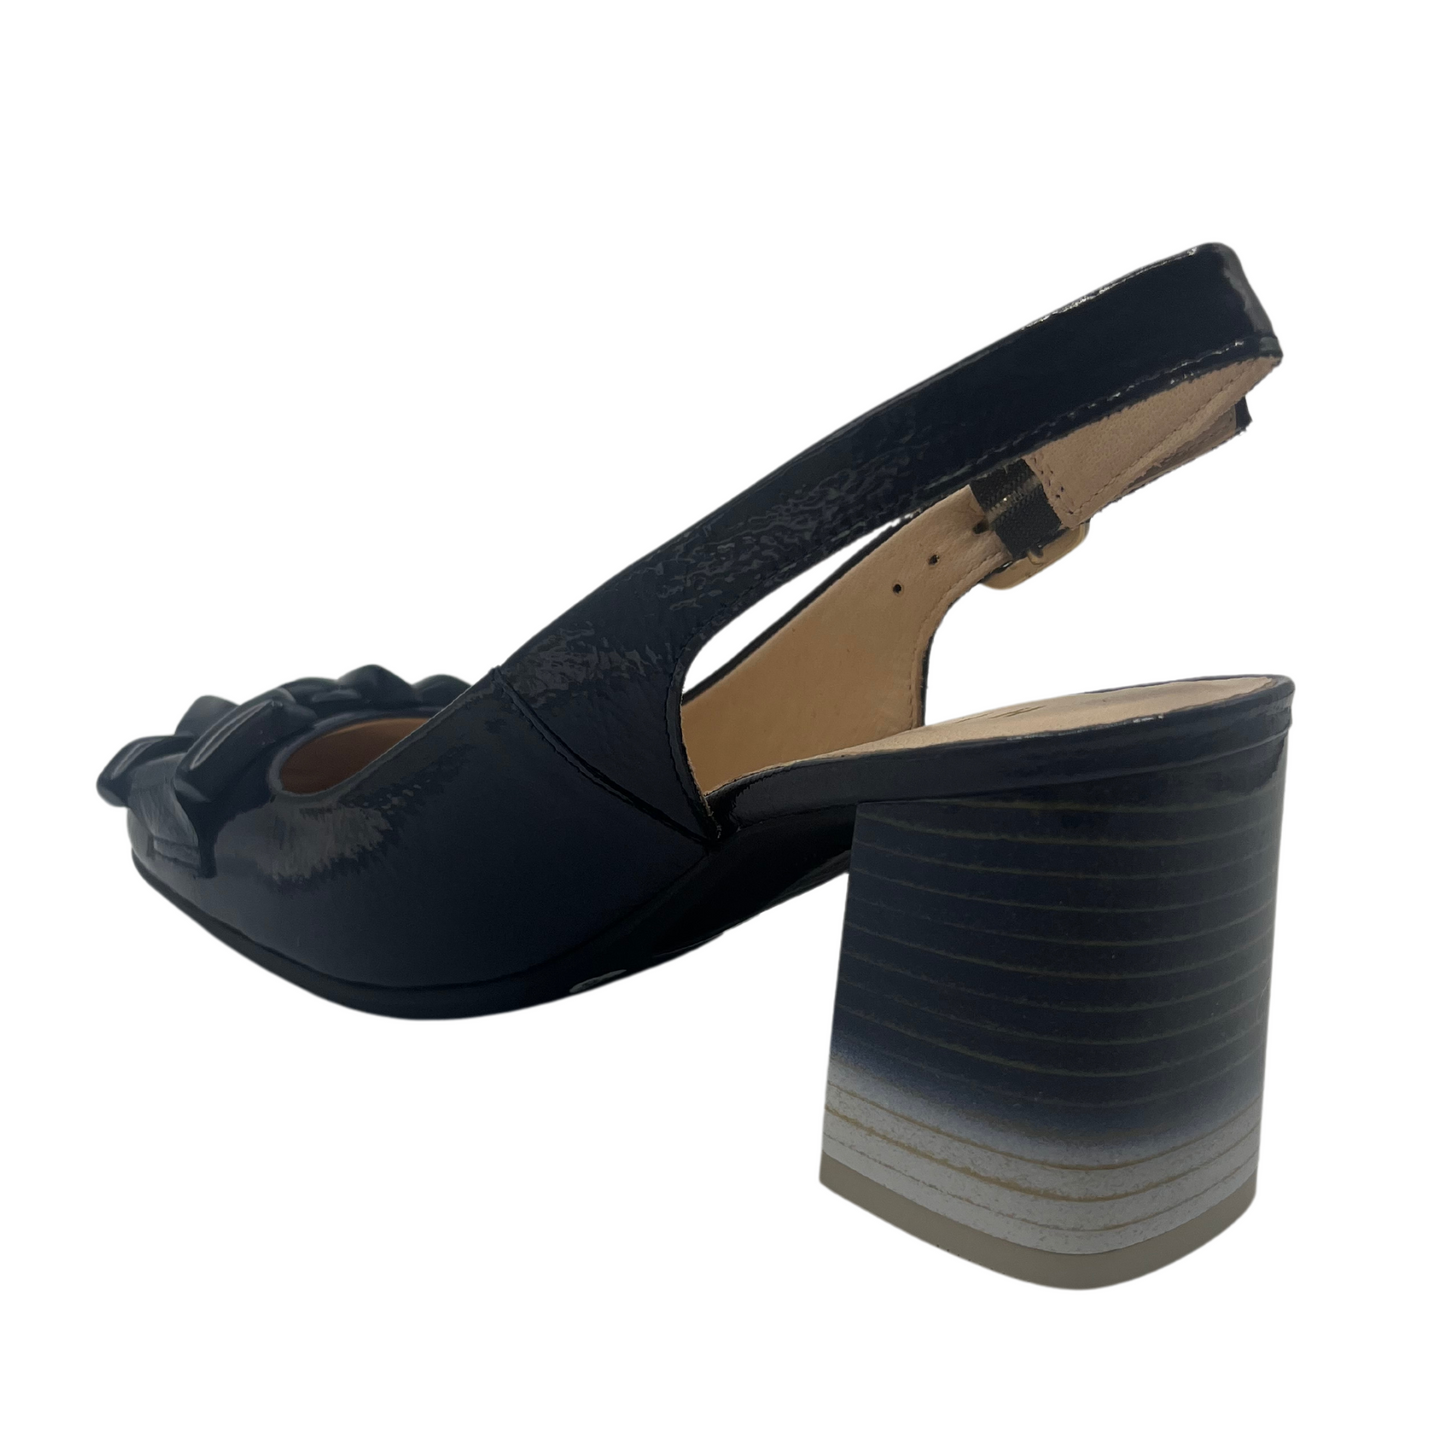 45 degree angled view of patent leather pump with sling back and ombre chunky heel